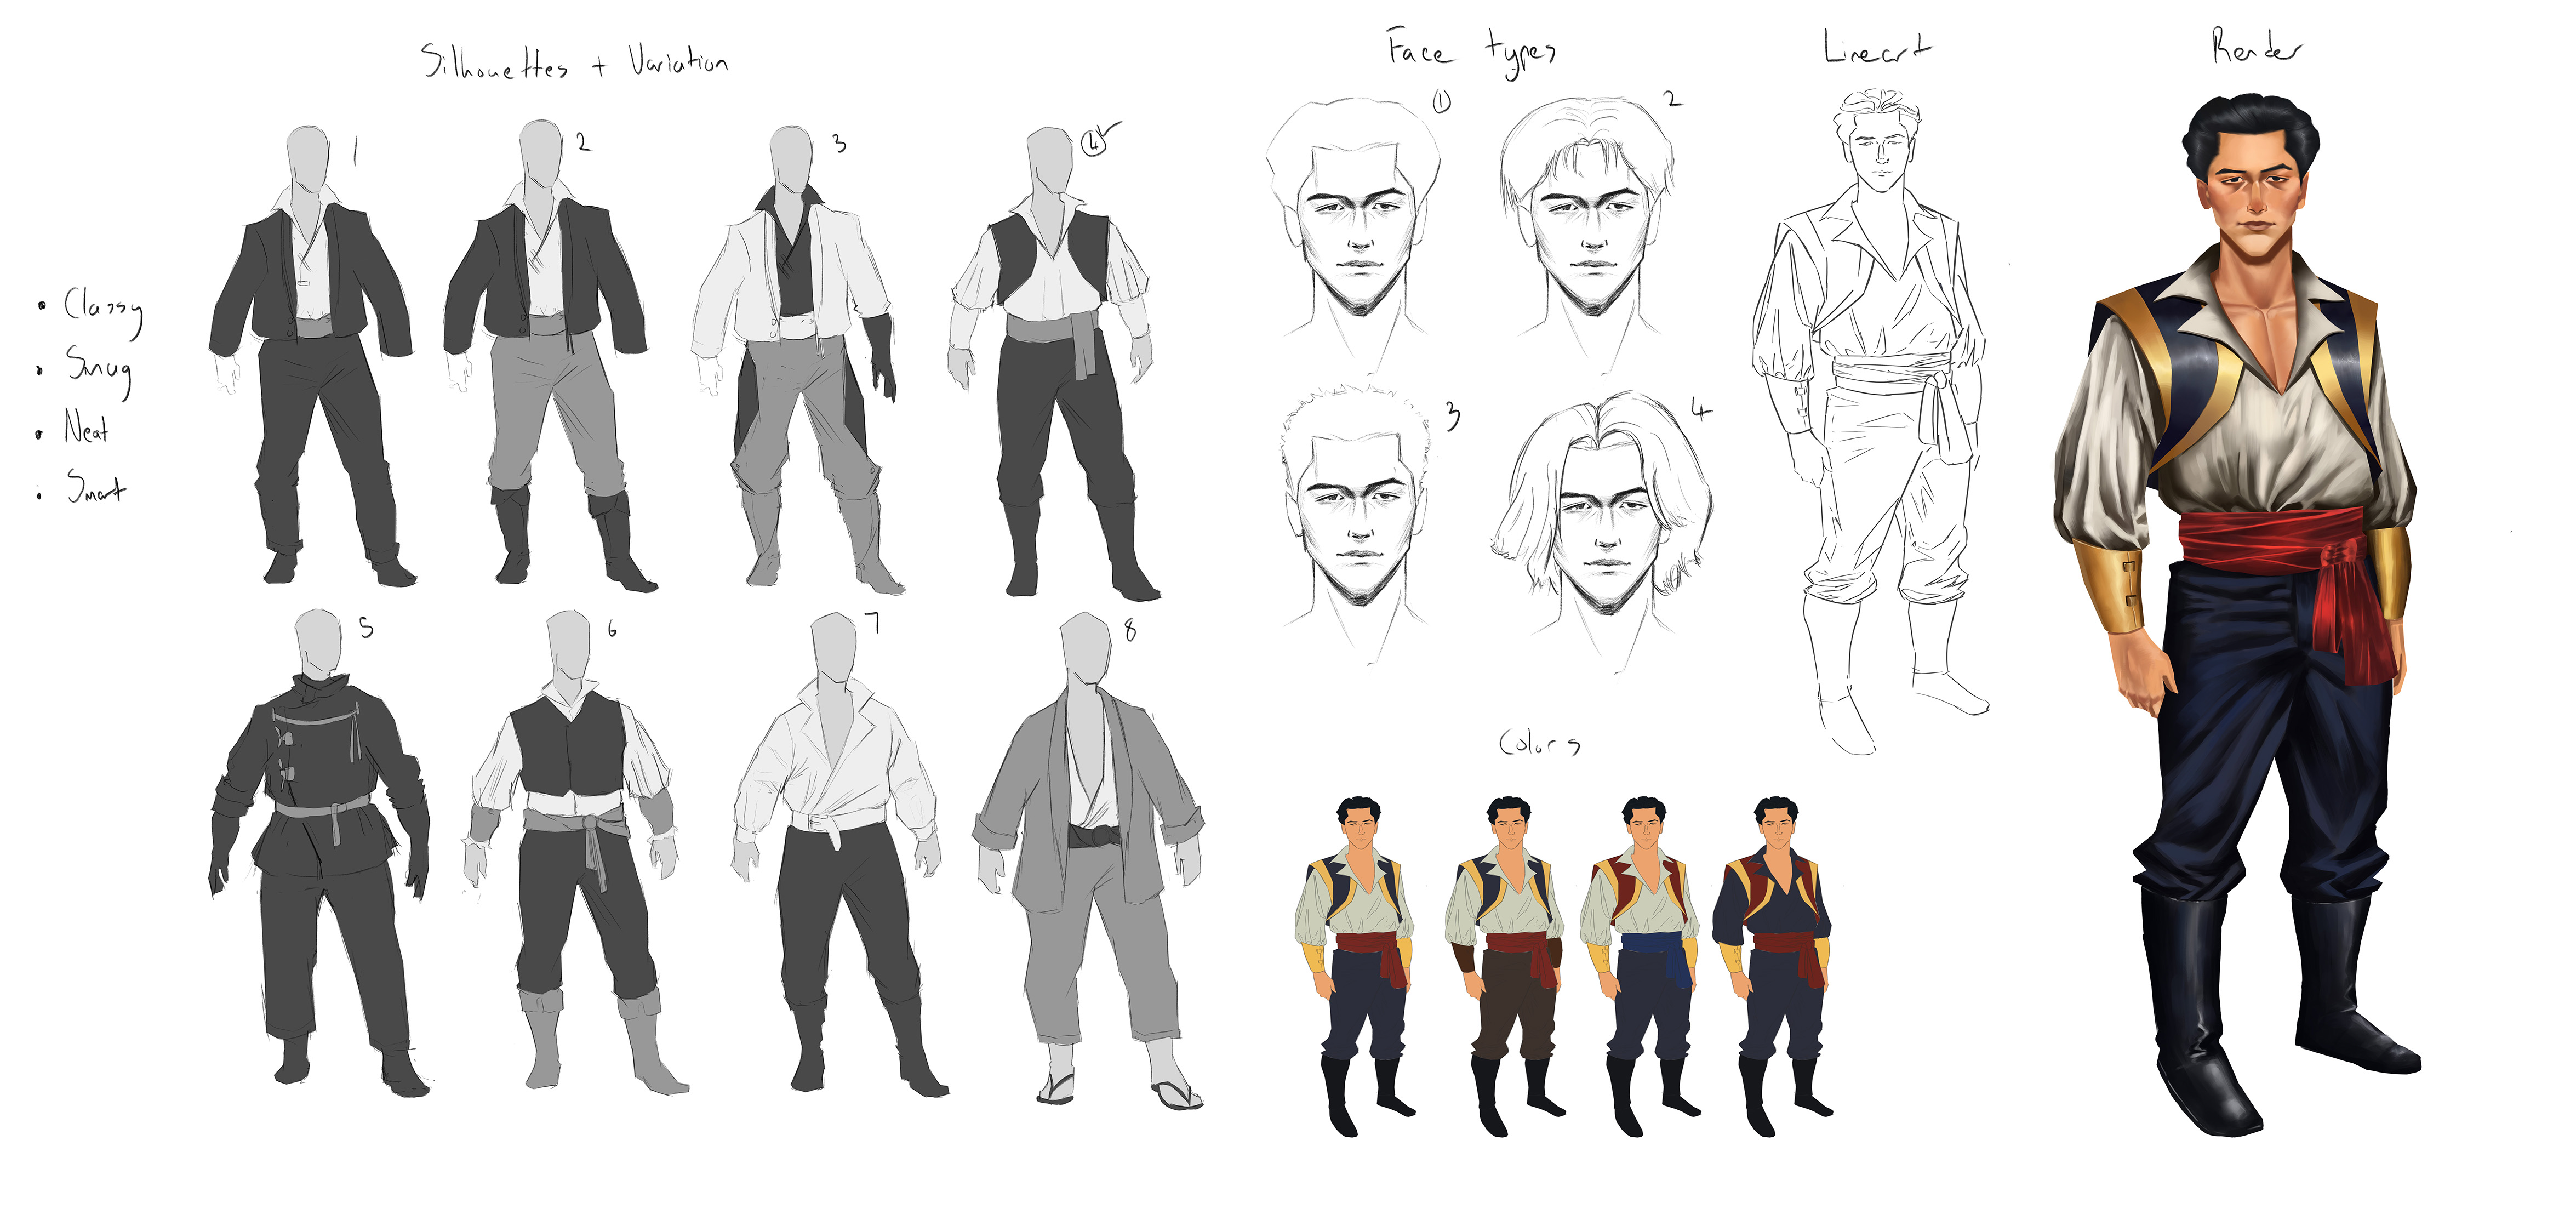  / Concept process showing design choices. Made with photoshop. 